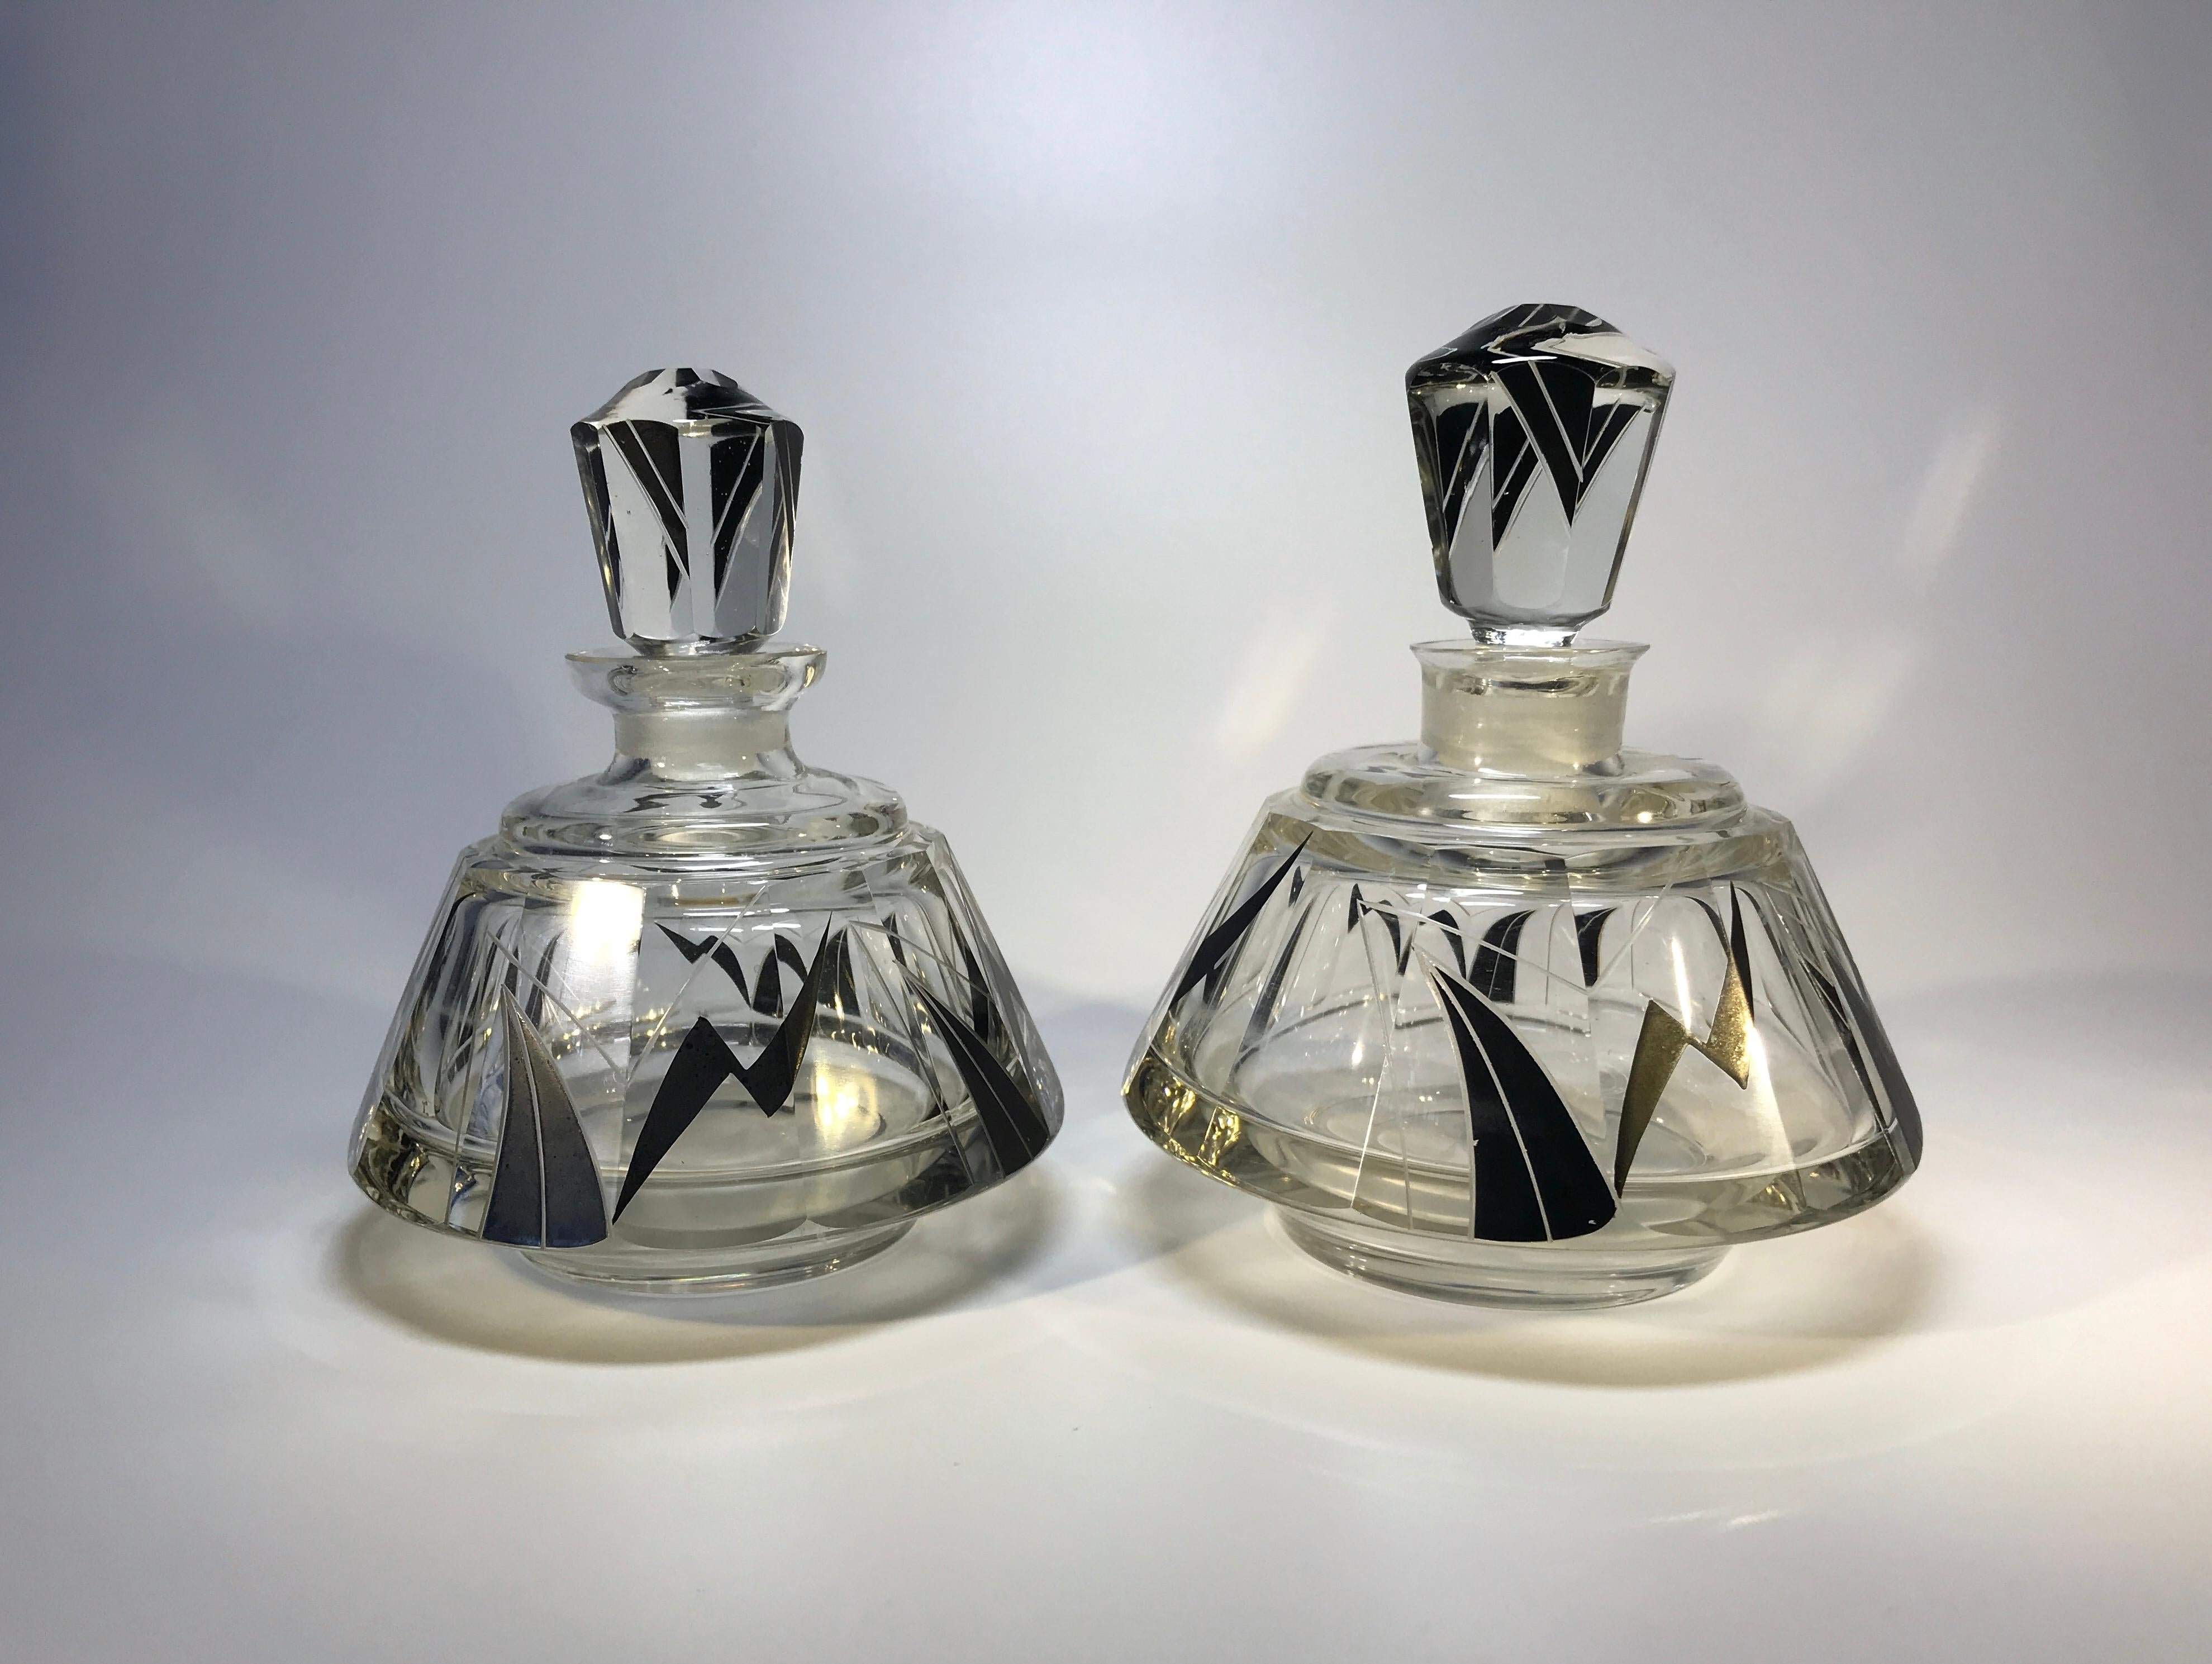 Fabulous Karl Palda Art Deco enamel and crystal five piece vanity set from the 1920s in exceptional condition
Set comprises of two impressive perfume bottles with stoppers, a working atomiser and two covered trinket boxes of different